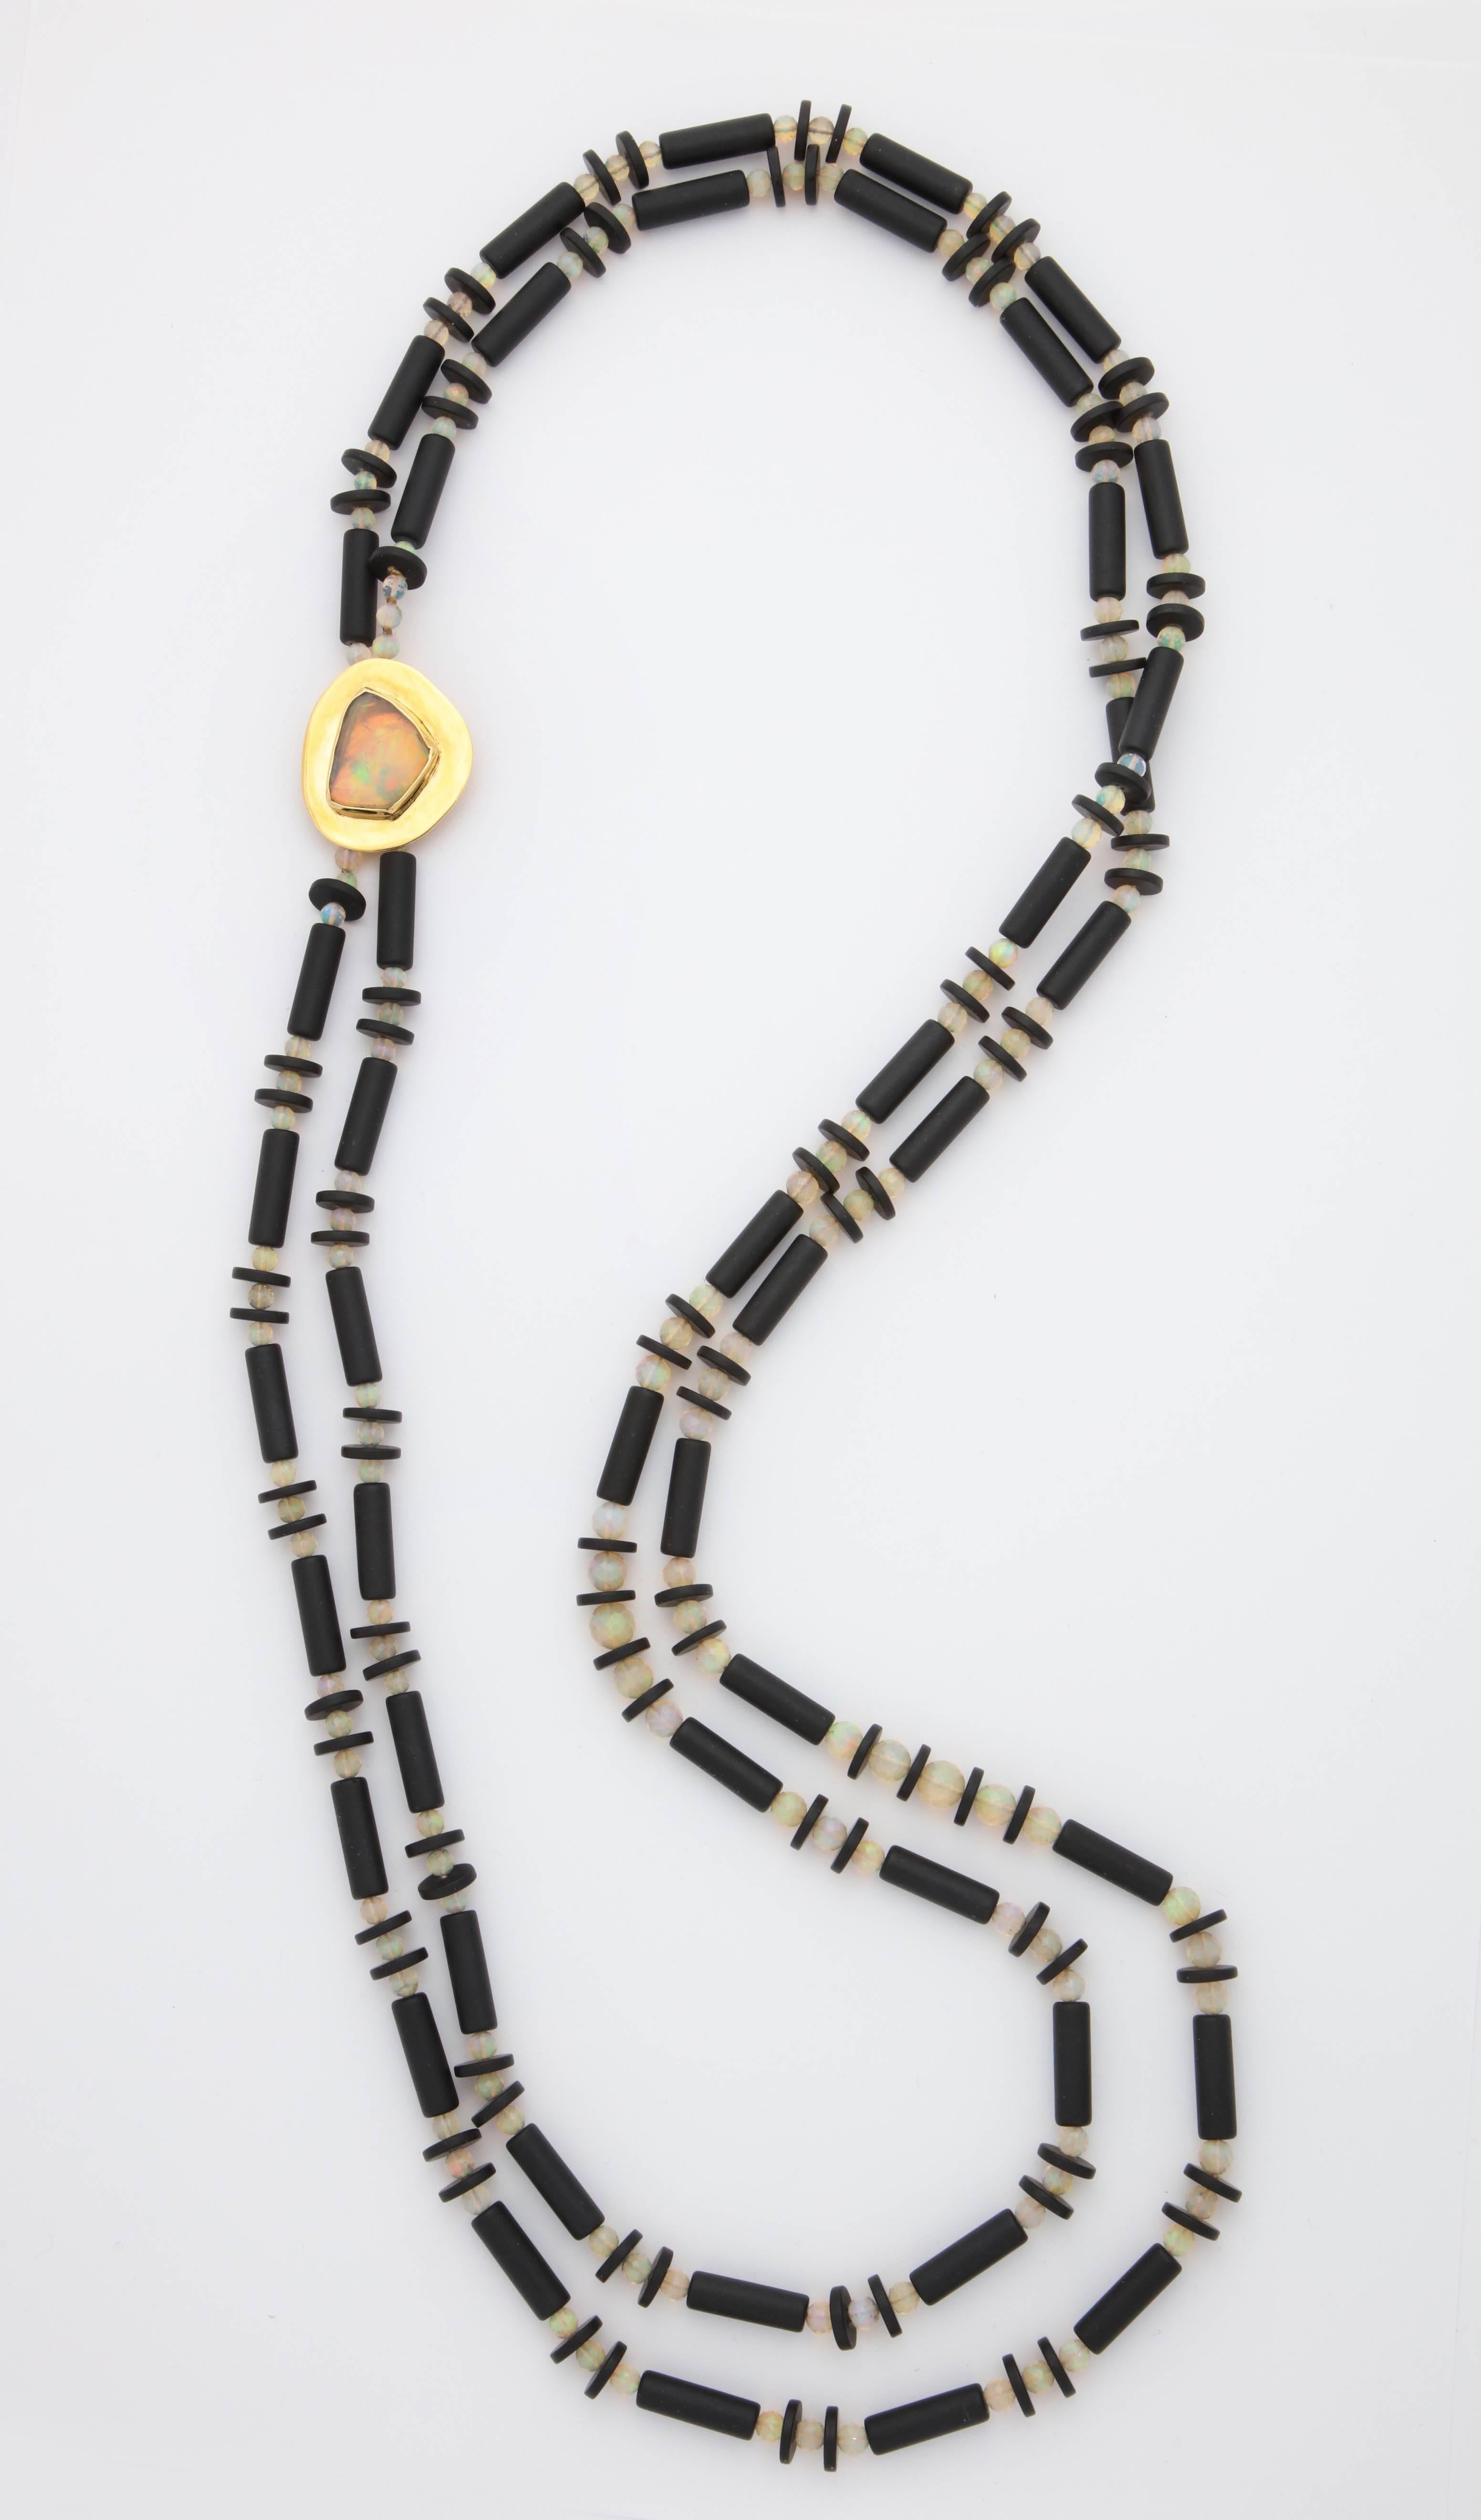 A double strand necklace composed of Ethiopian opal beads and honed onyx tube and disc beads.
The 18kt yellow gold clasp houses a bezel set free form Ethiopian opal.

Length: 39.00 inches
Clasp: 1.25 x 1.50 inches